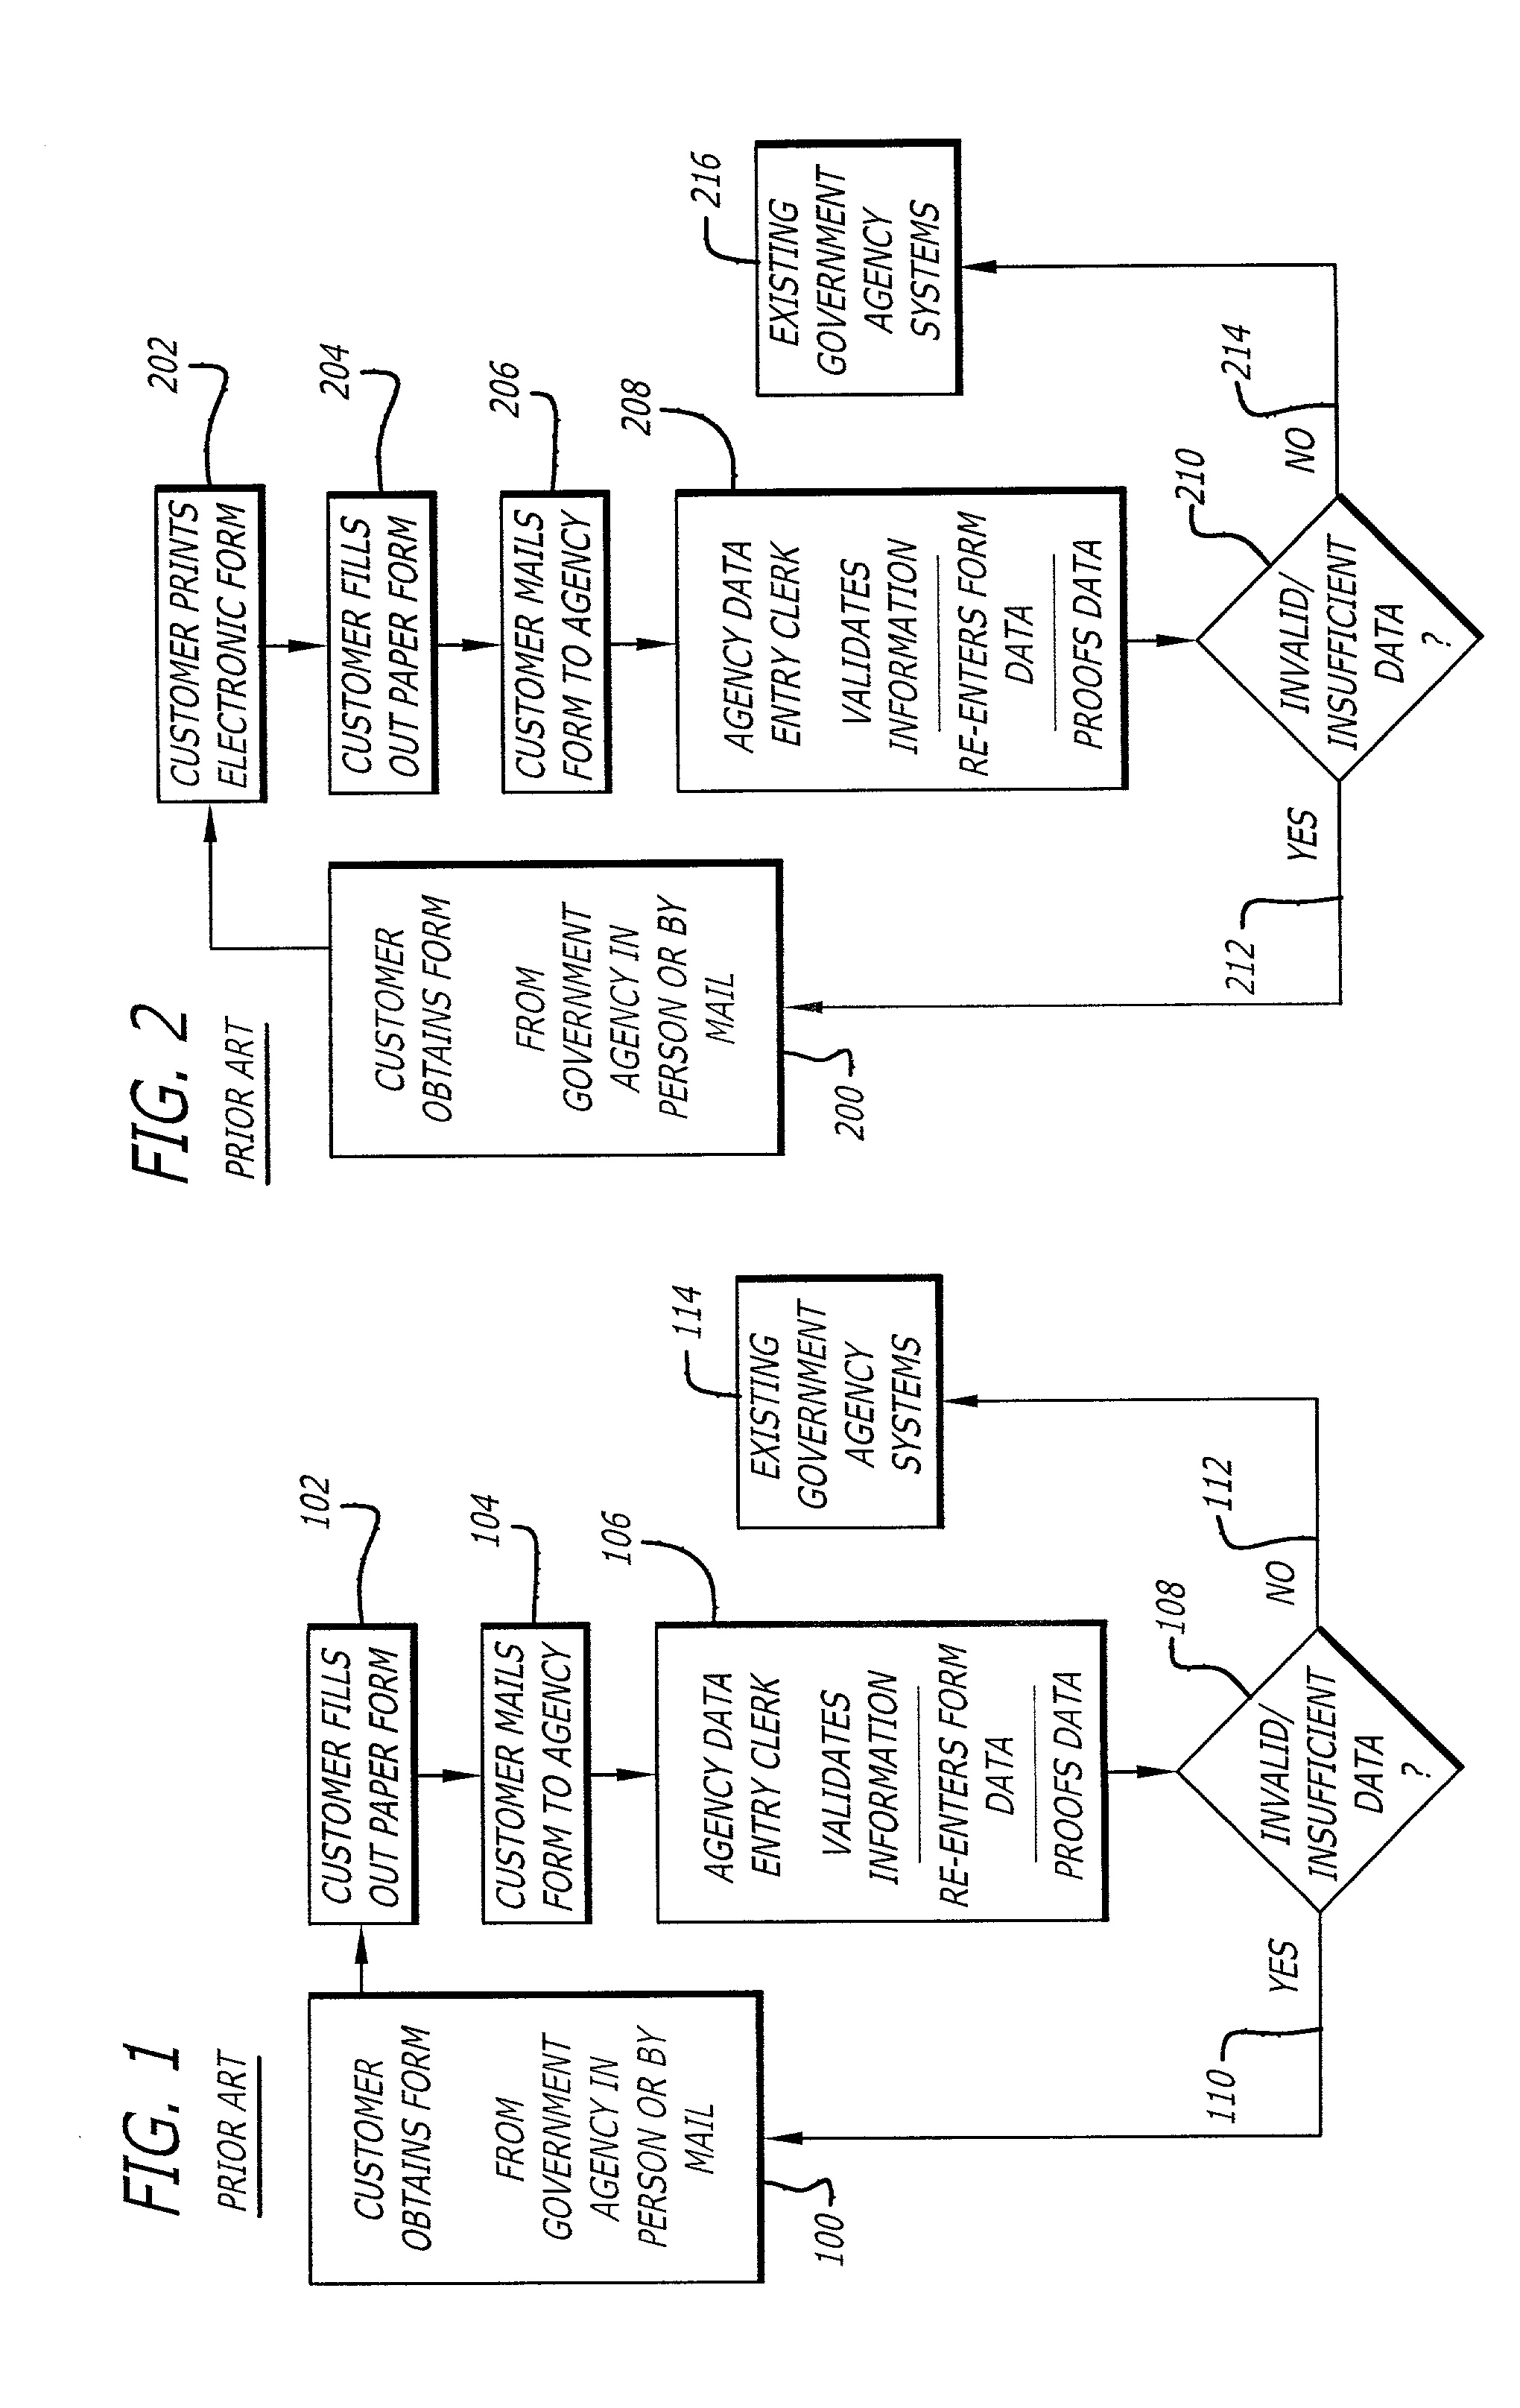 Single access point for filing of converted electronic forms to multiple processing entities